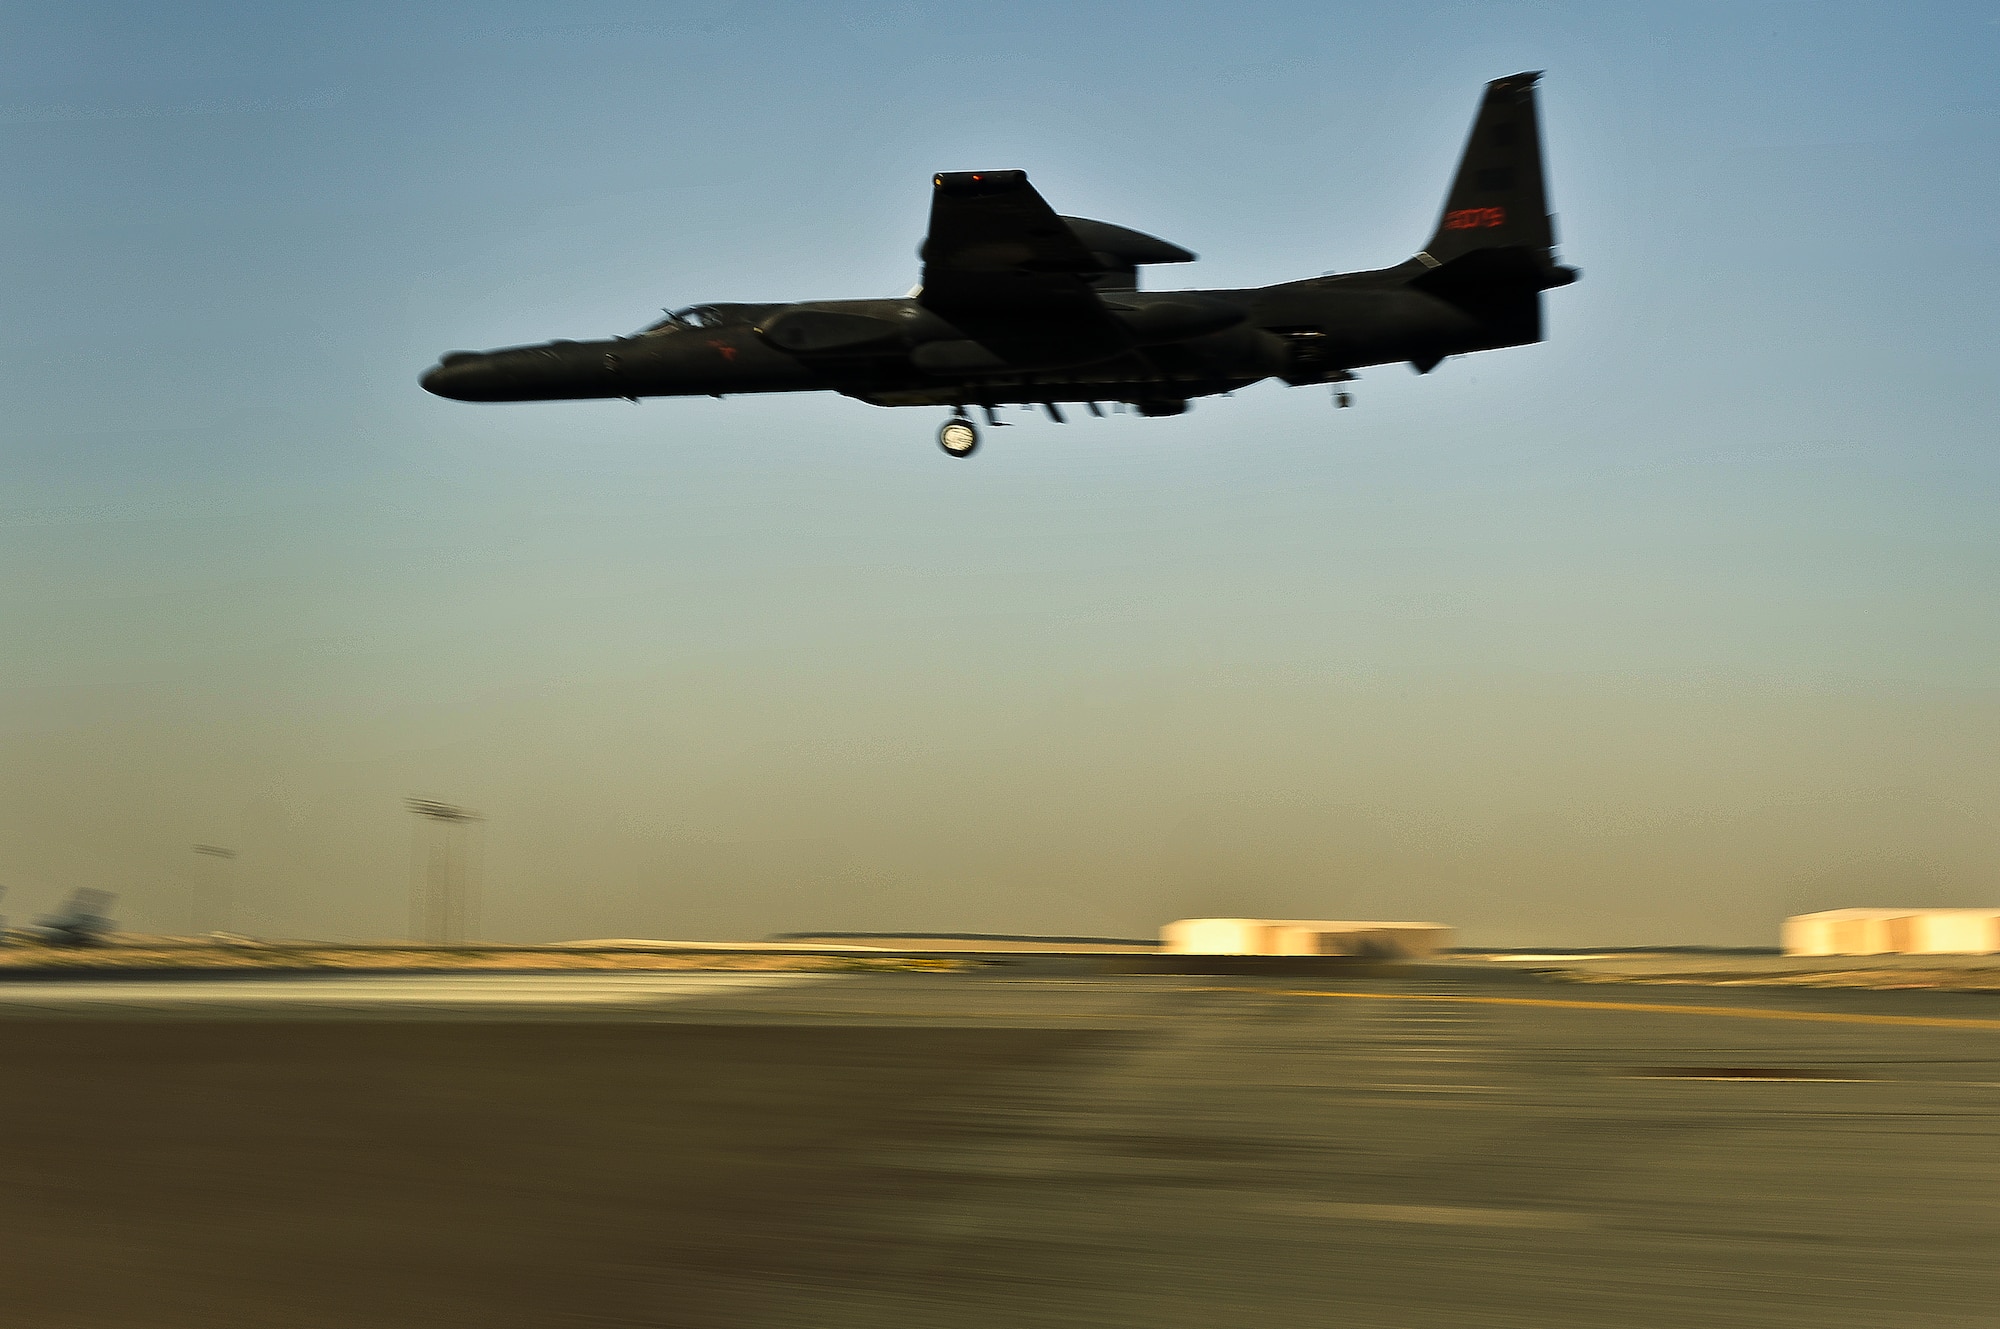 Lt. Col. Jeff Klosky, a 99th Expeditionary Reconnaissance Squadron U-2 mission pilot, lands his aircraft April 20, 2014, at a flightline in Southwest Asia. The flight marked Klosky’s 2,500th hour of flight in the U-2. (U.S. Air Force photo/Tech. Sgt. Russ Scalf)